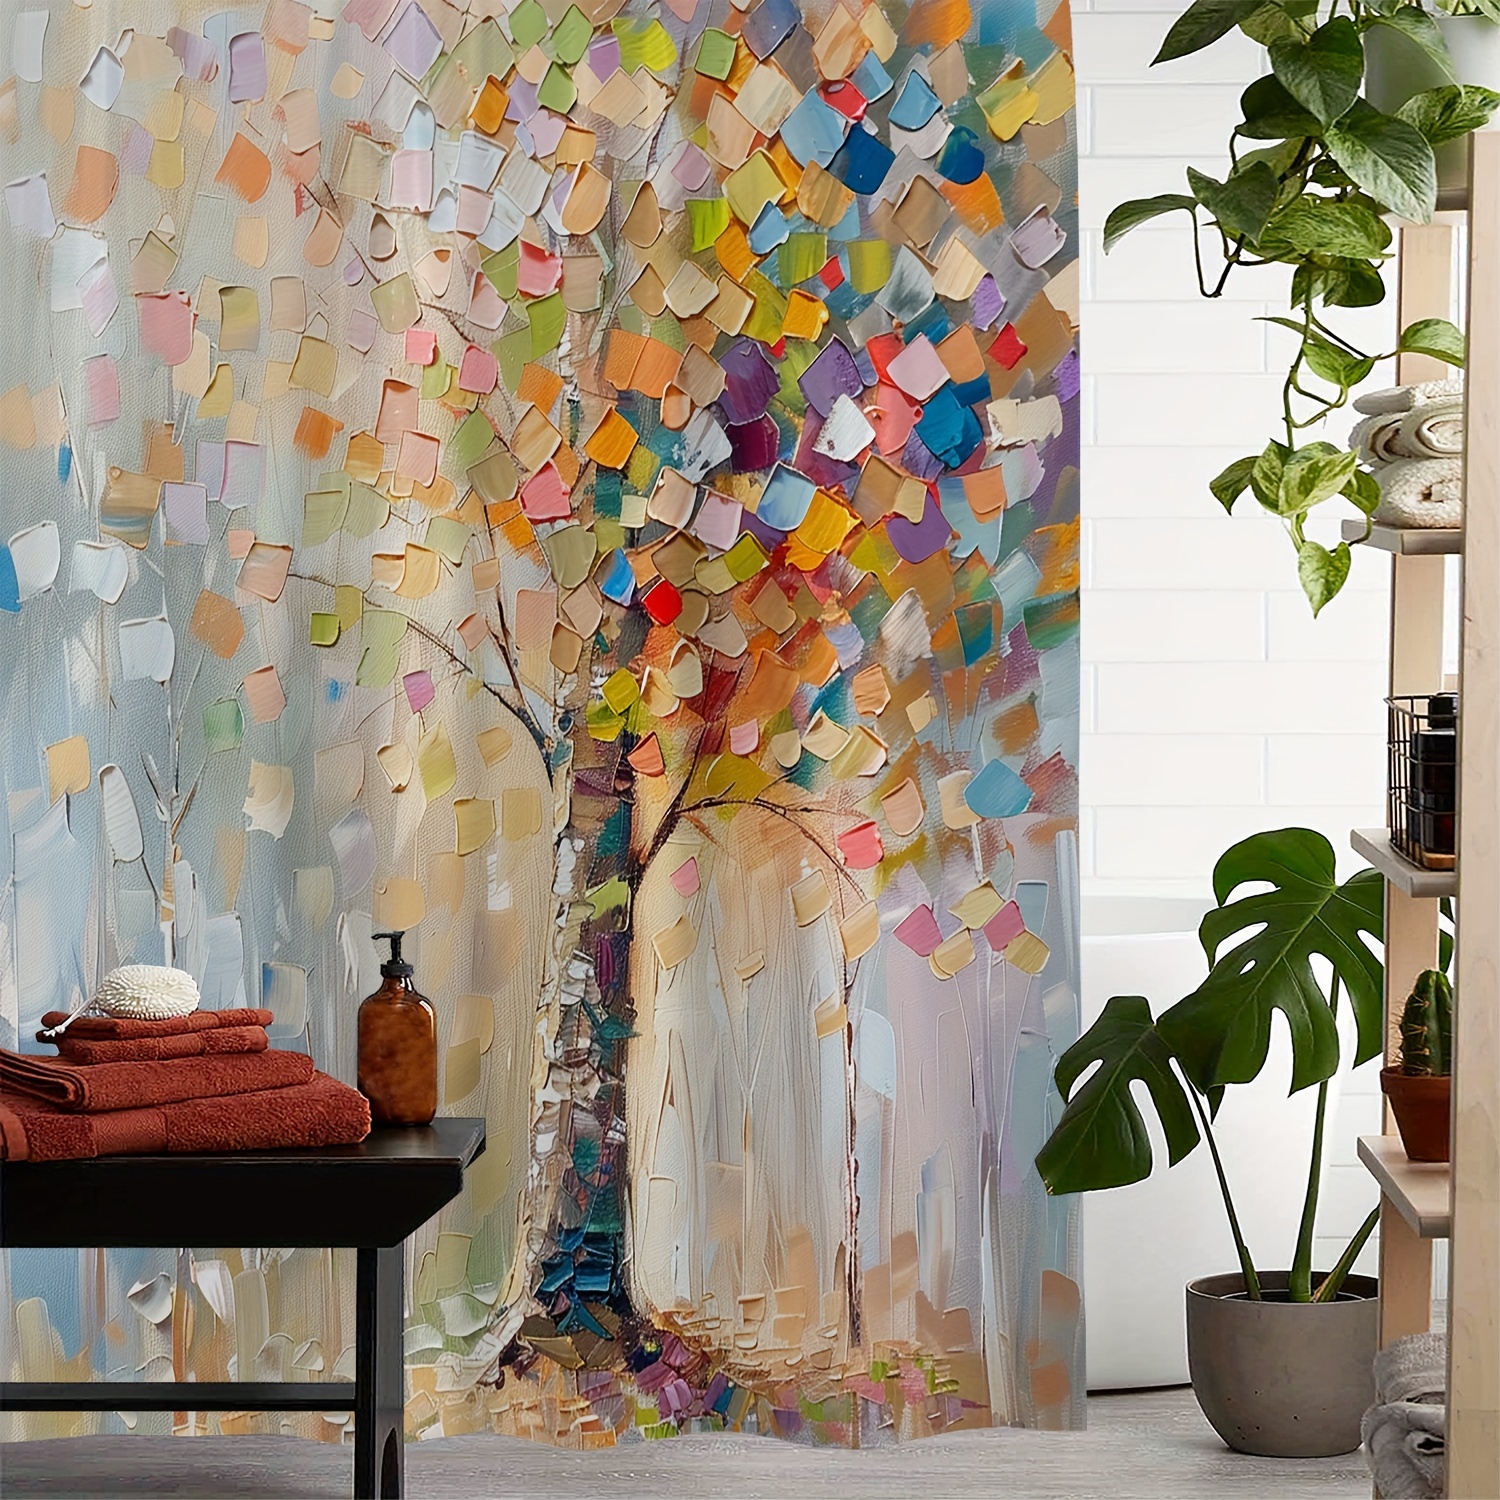 

Colorful Oil Painting Tree Print Waterproof Shower Curtain With 12 Hooks, Machine Washable, Water-resistant Polyester, Artistic Design, Woven Weave, Unique Patterned Bath Accessory